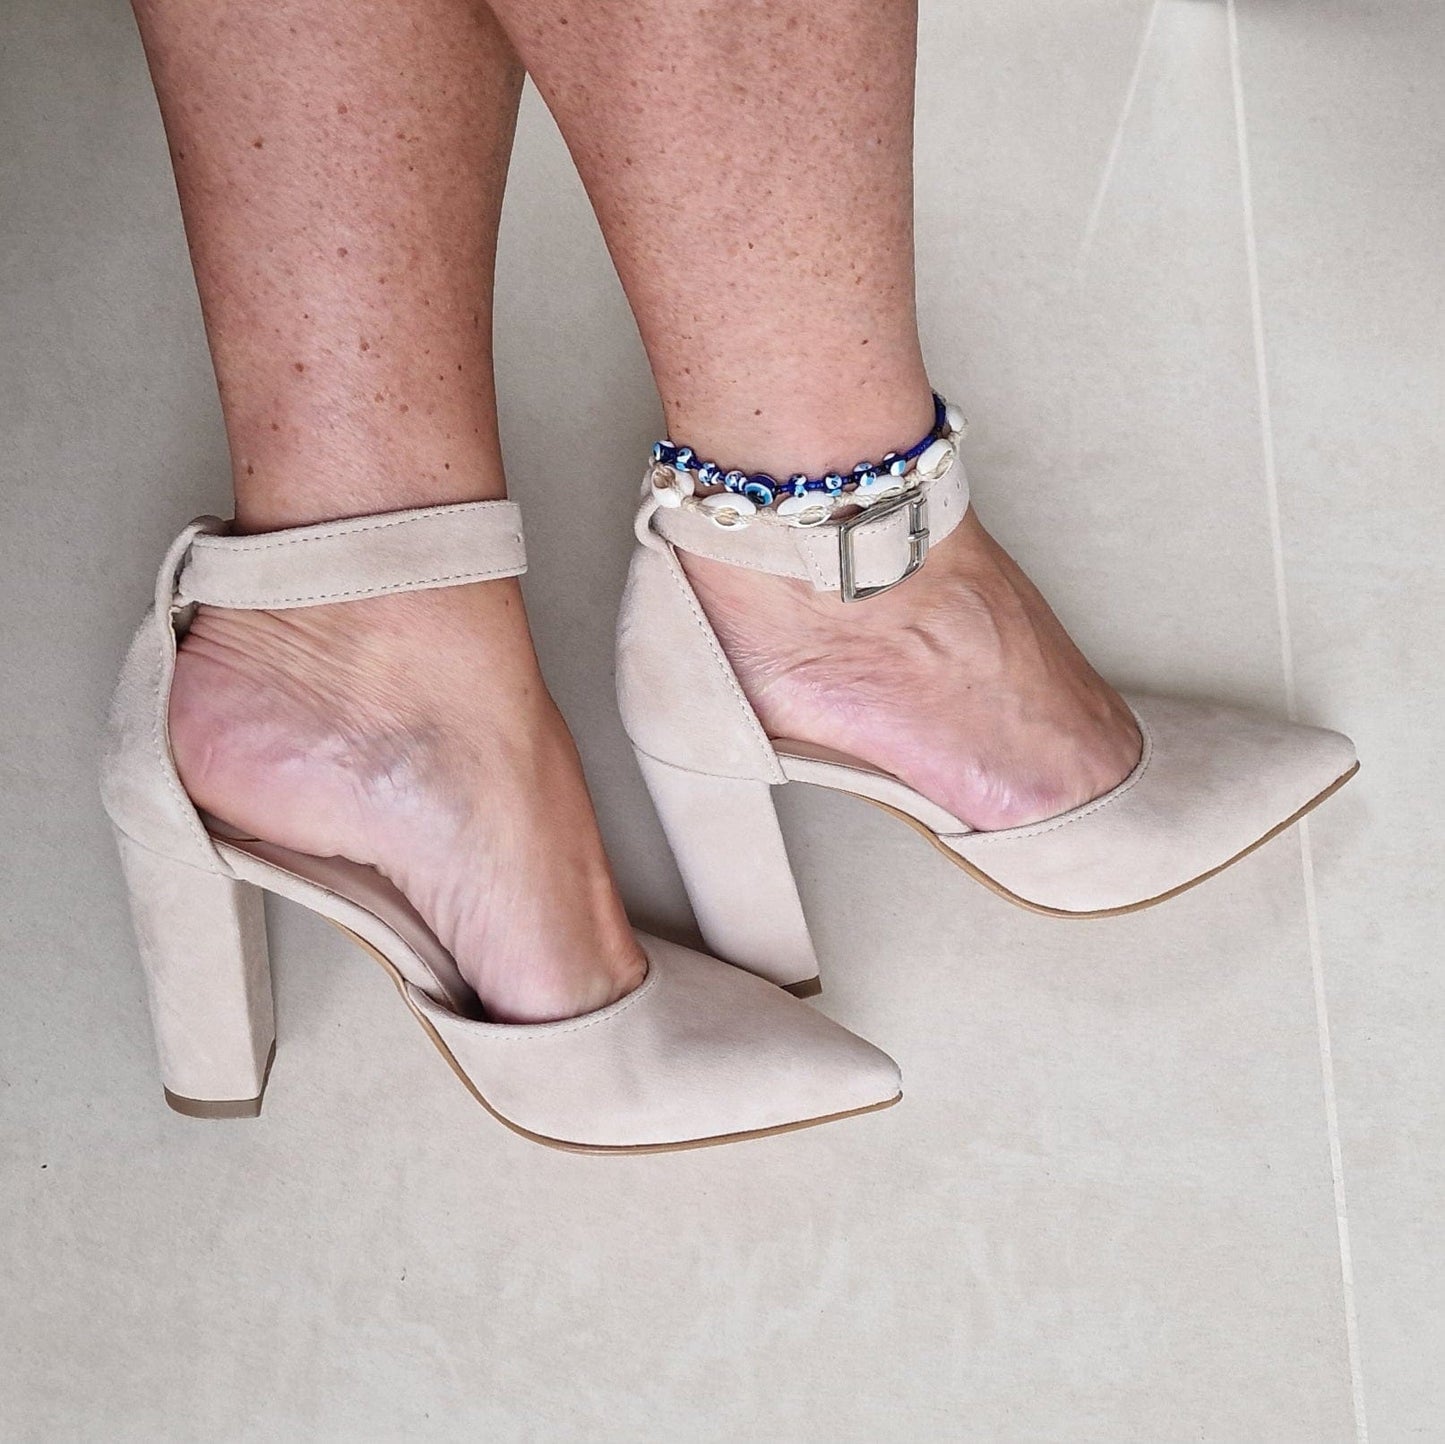 A woman wearing pointed toe court shoes in nude suede leather